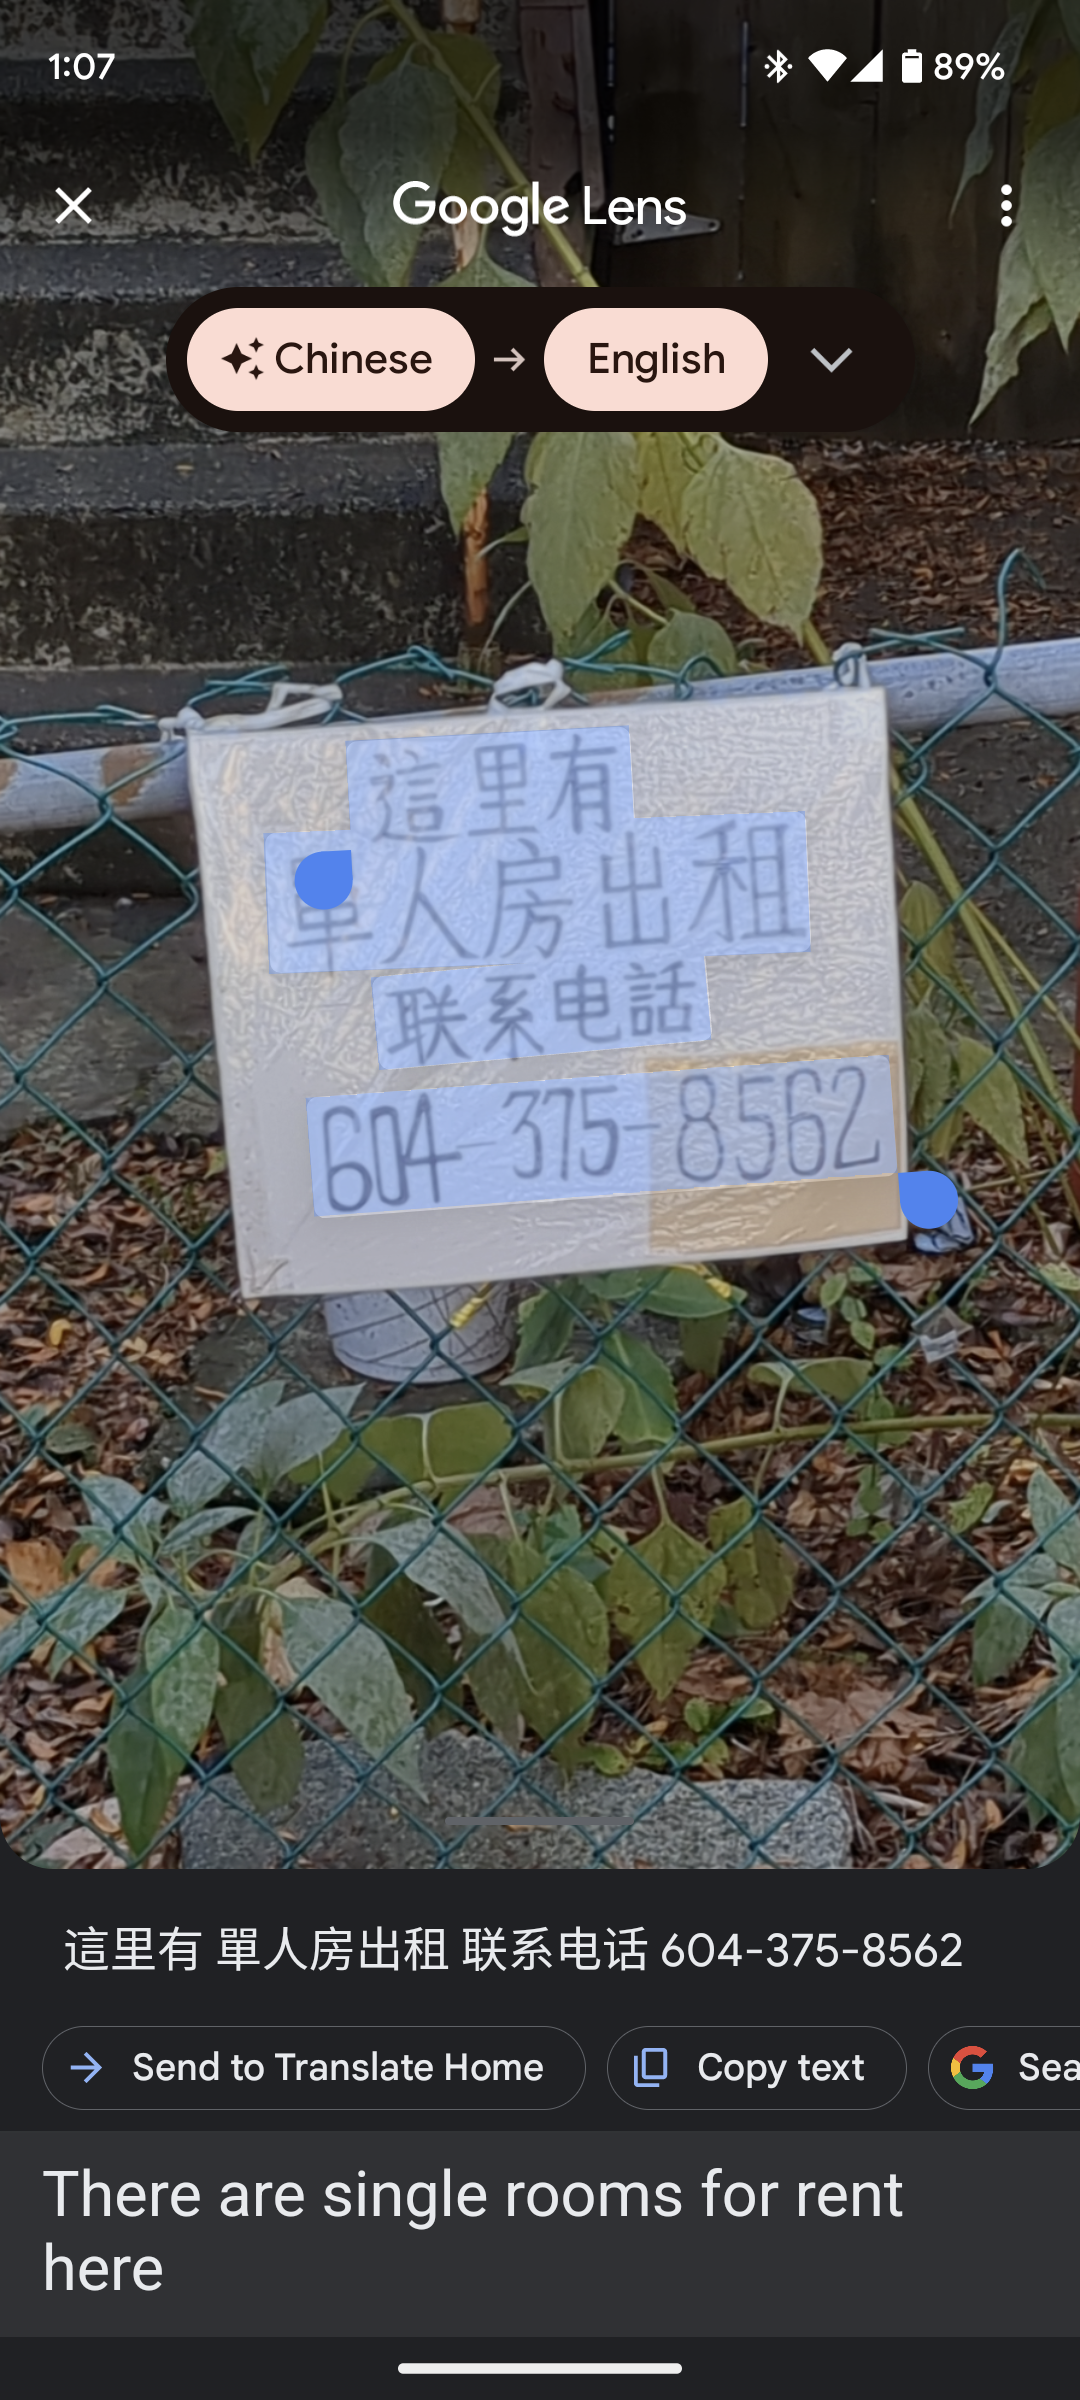 Translating a Chinese sign